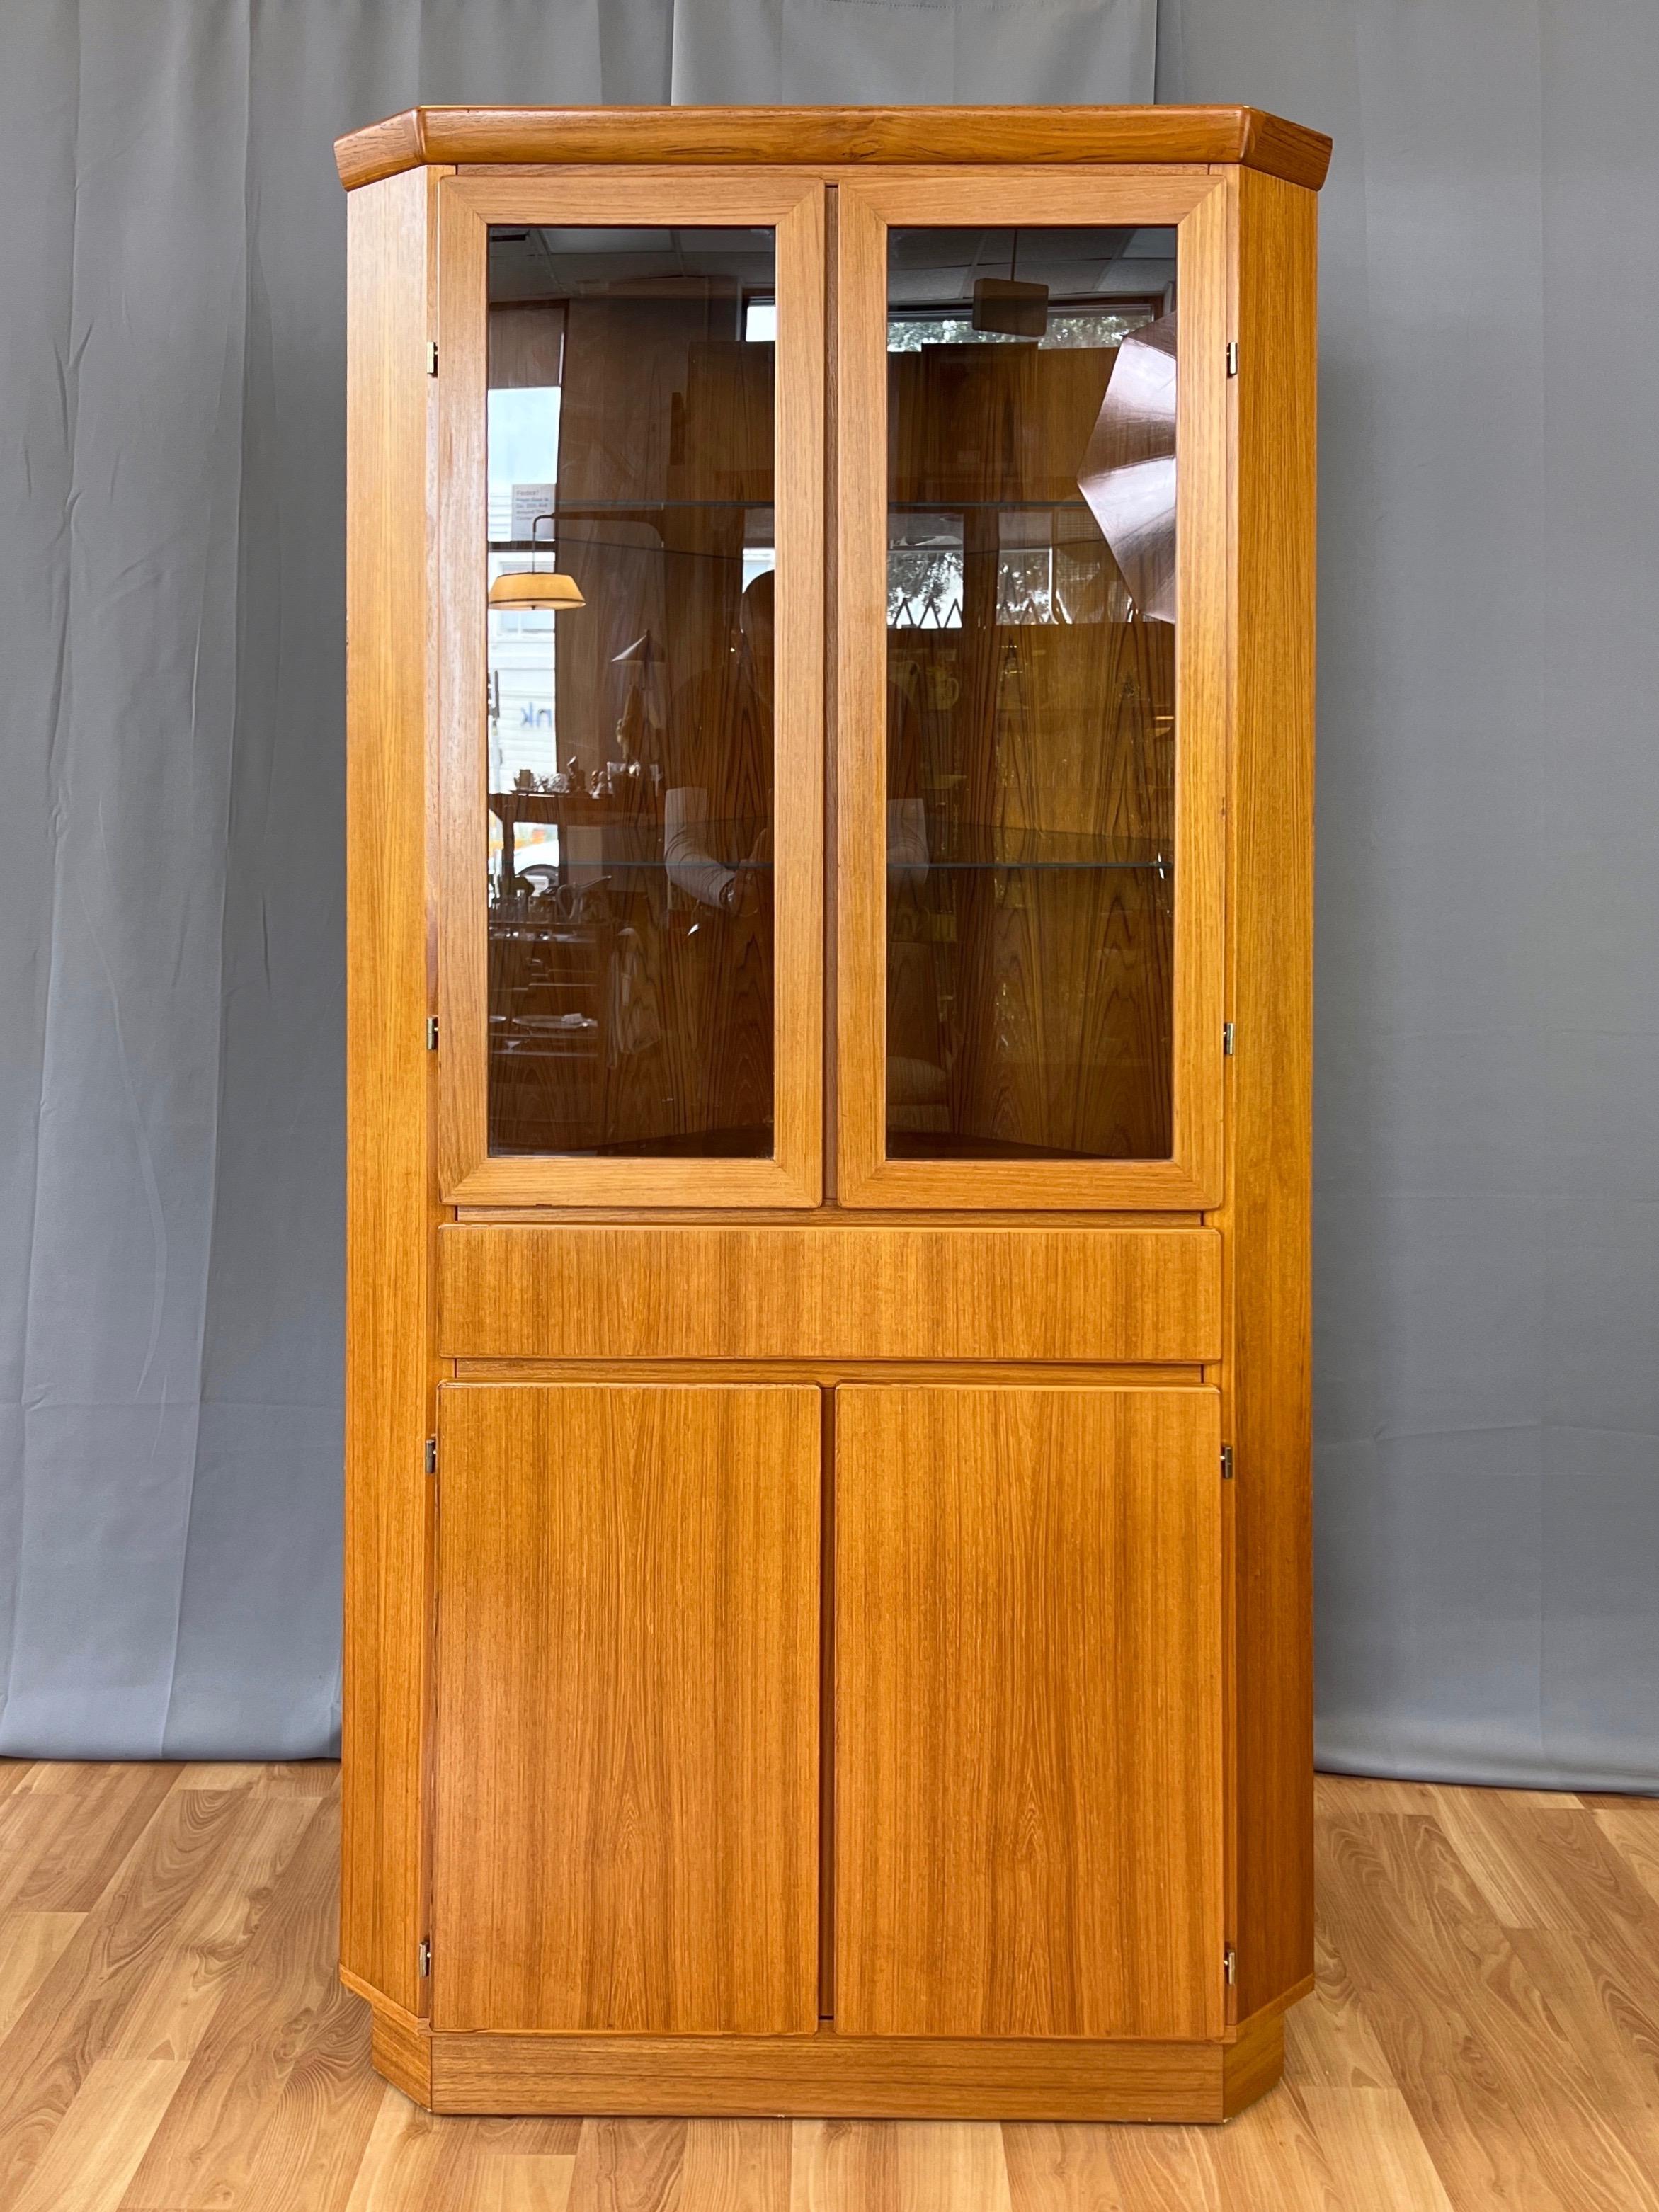 A 1970s Danish modern Skovby Møbelfabrik tall teak lighted corner display cabinet with glass doors and shelves.

Clean lines and handsomely figured teak from top to bottom. Upper half with a pair of glass doors, behind which are two